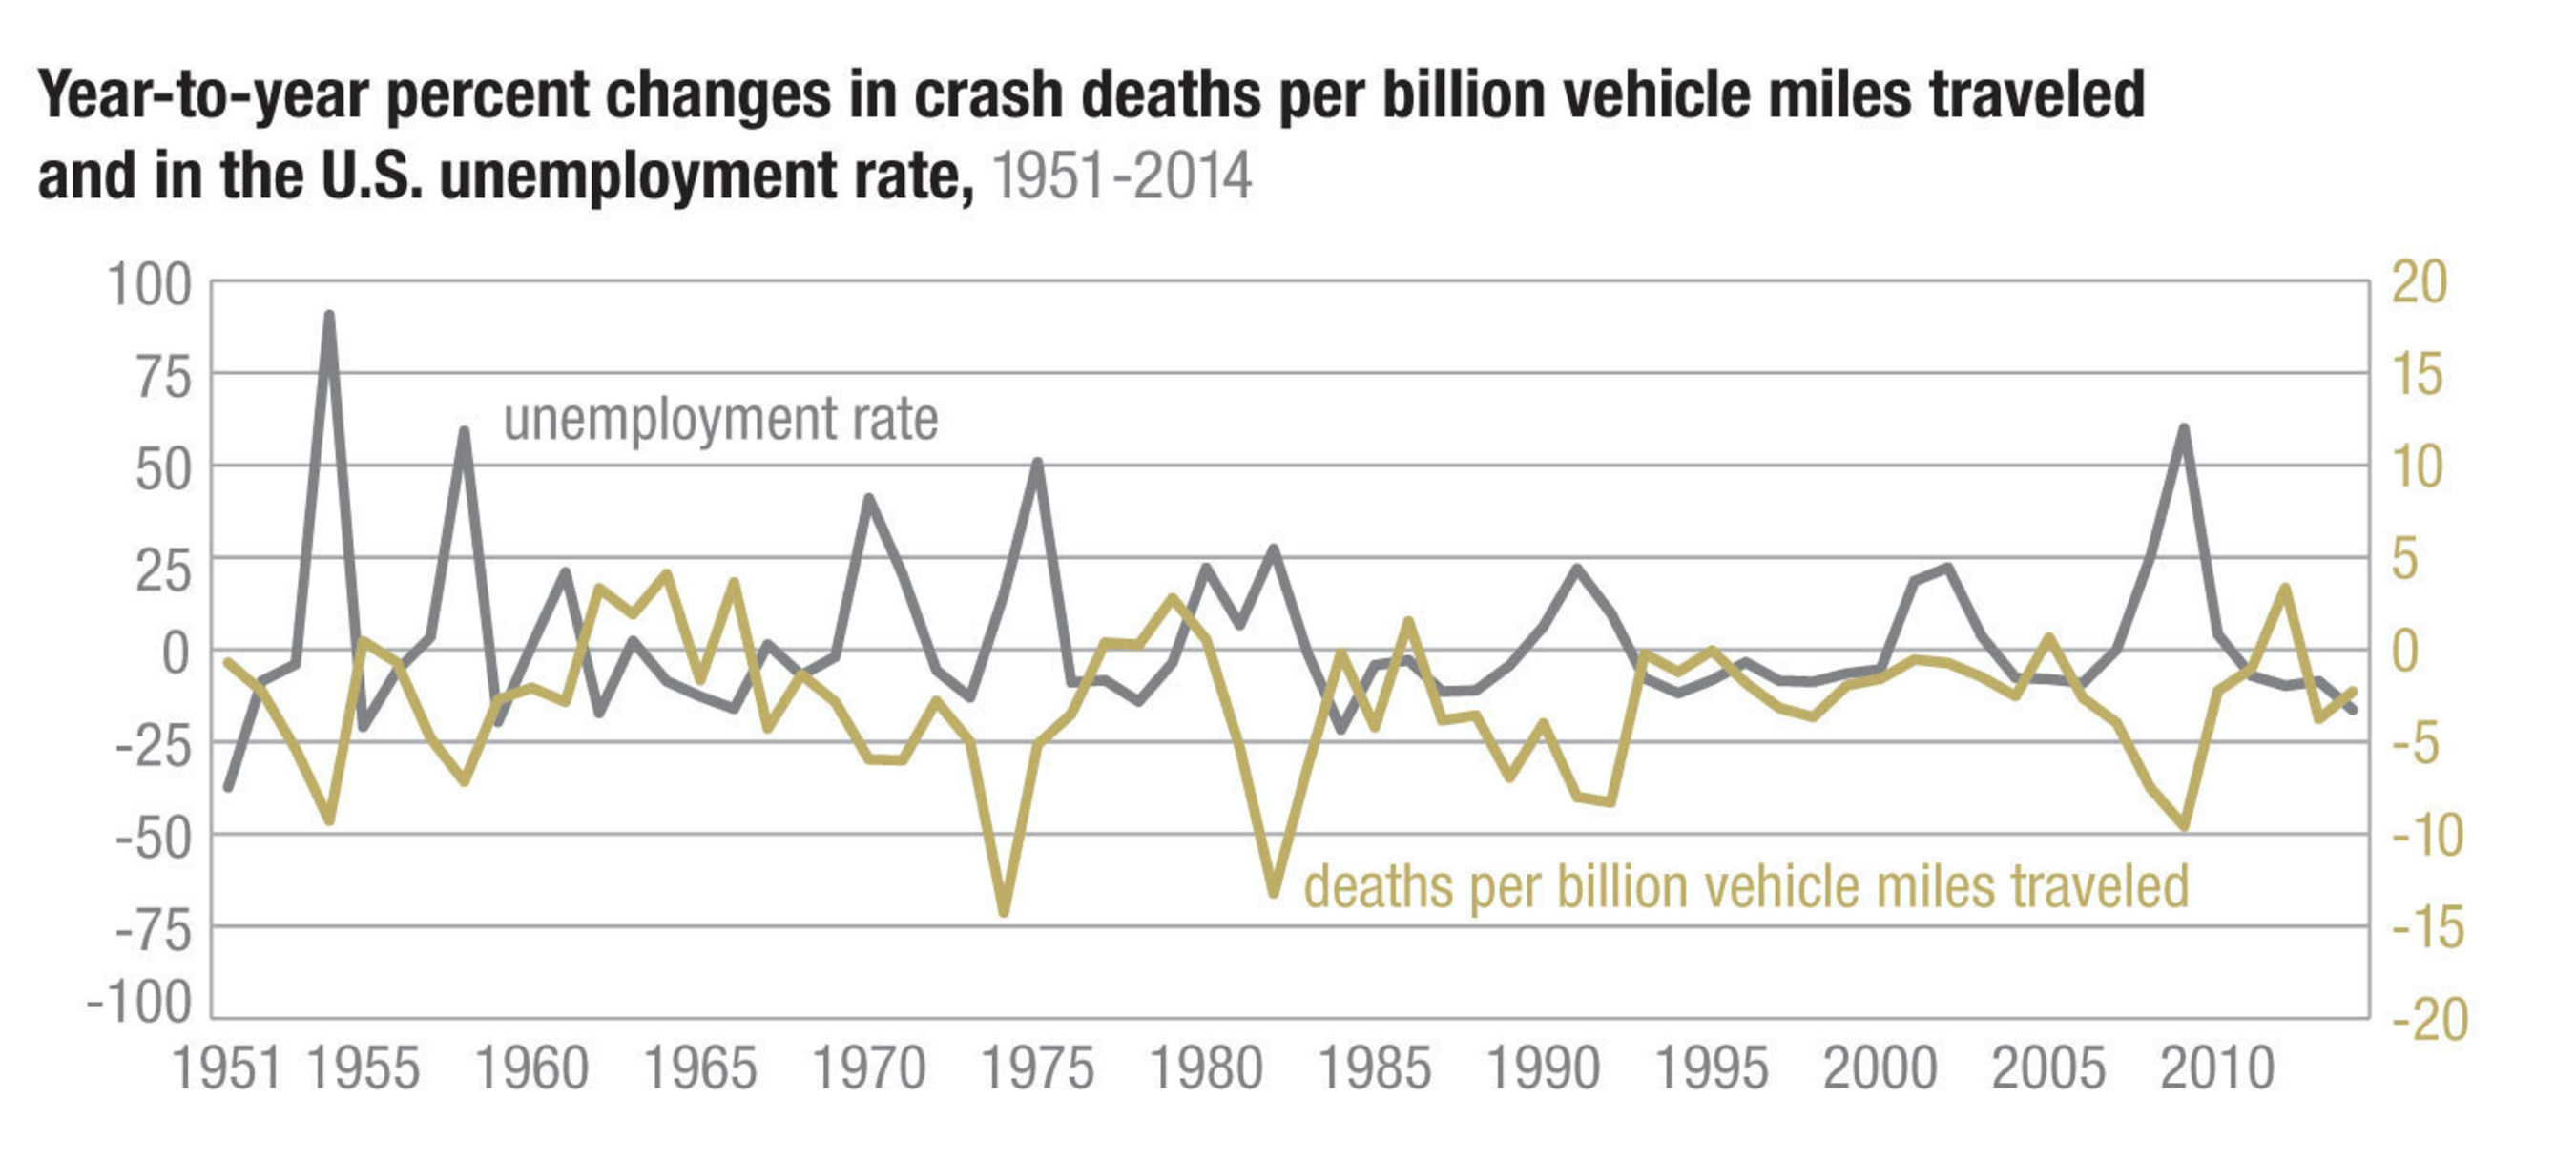 Year-to-year percent changes in crash deaths per billion vehicle miles traveled and in the U.S. unemployment rate